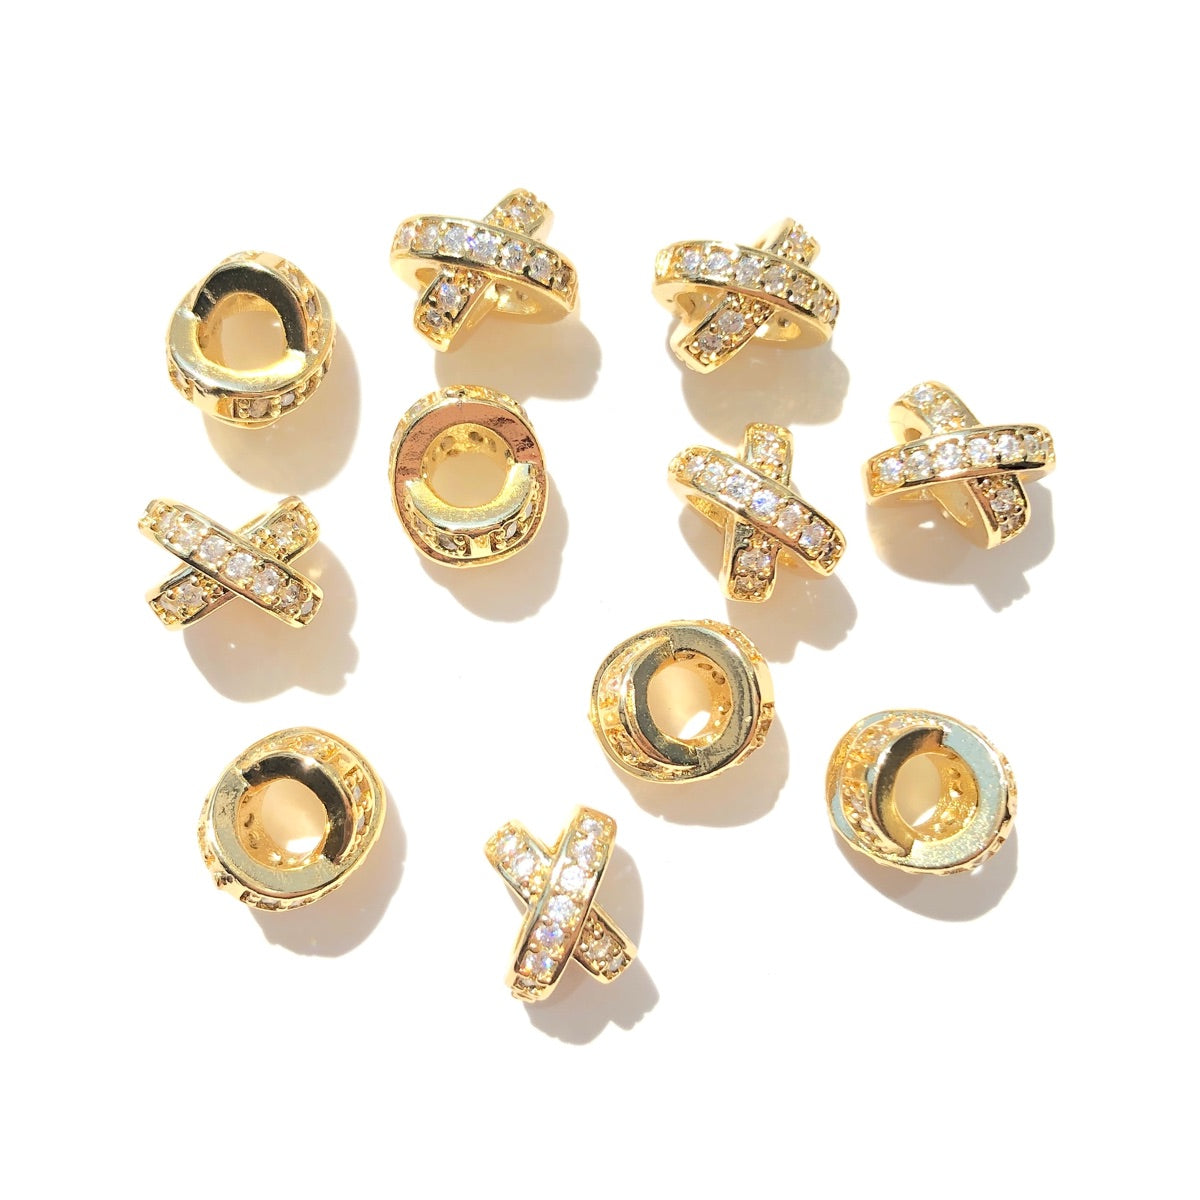 20-50pcs/lot 8mm CZ Paved Cross Spacers Gold CZ Paved Spacers New Spacers Arrivals Rondelle Beads Wholesale Charms Beads Beyond